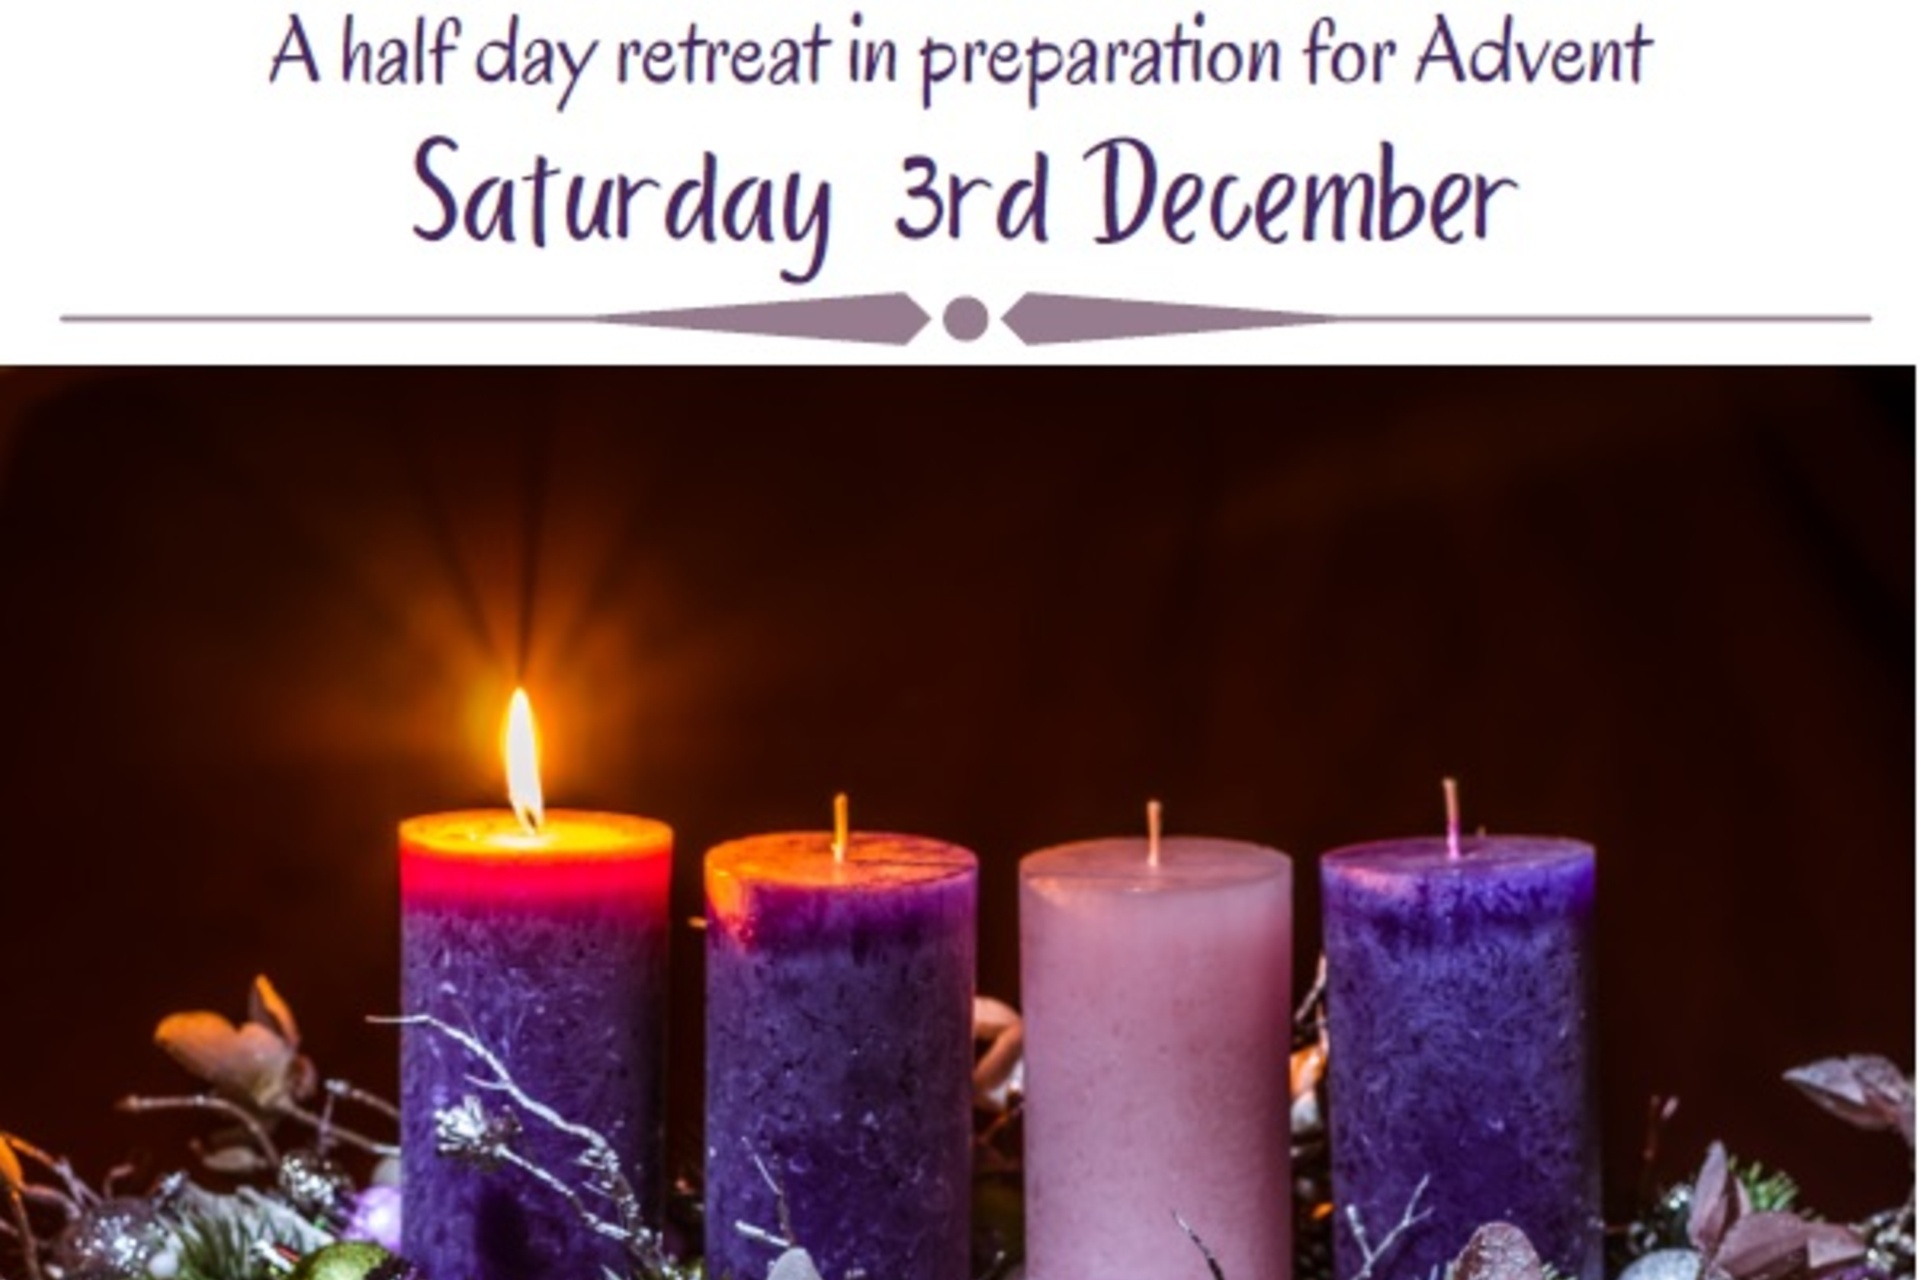 Time Apart with God' Advent Retreat in the Redemptorists.